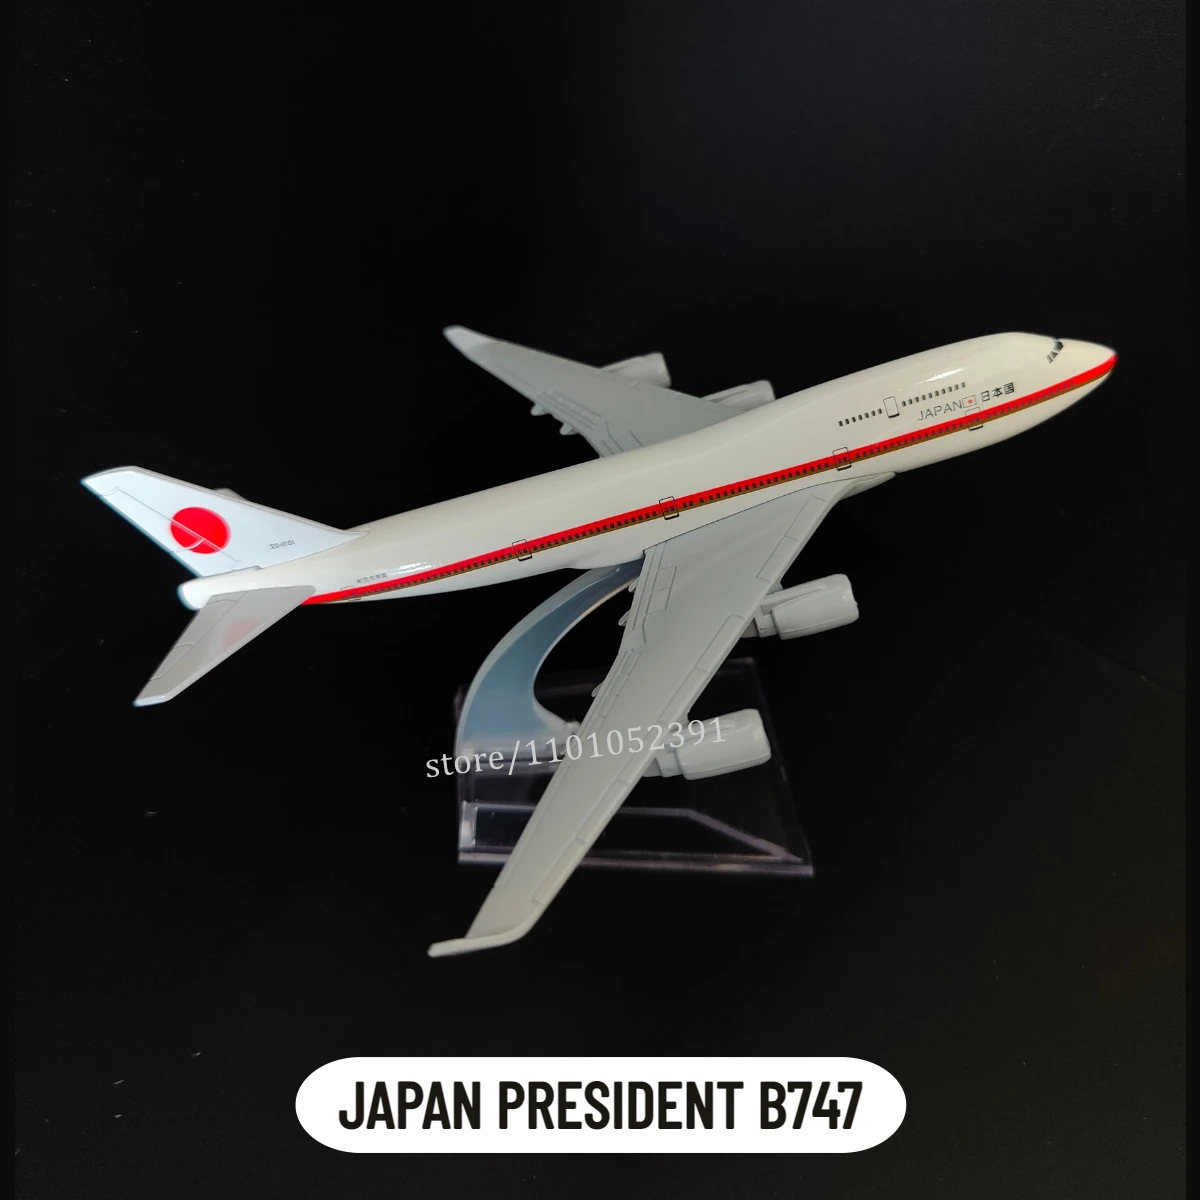 

Scale 1:400 Metal Aircraft Replica 15cm Air DELTA B747 Airplane Diecast Model Plane Aviation Collectible Miniature Gift Toy